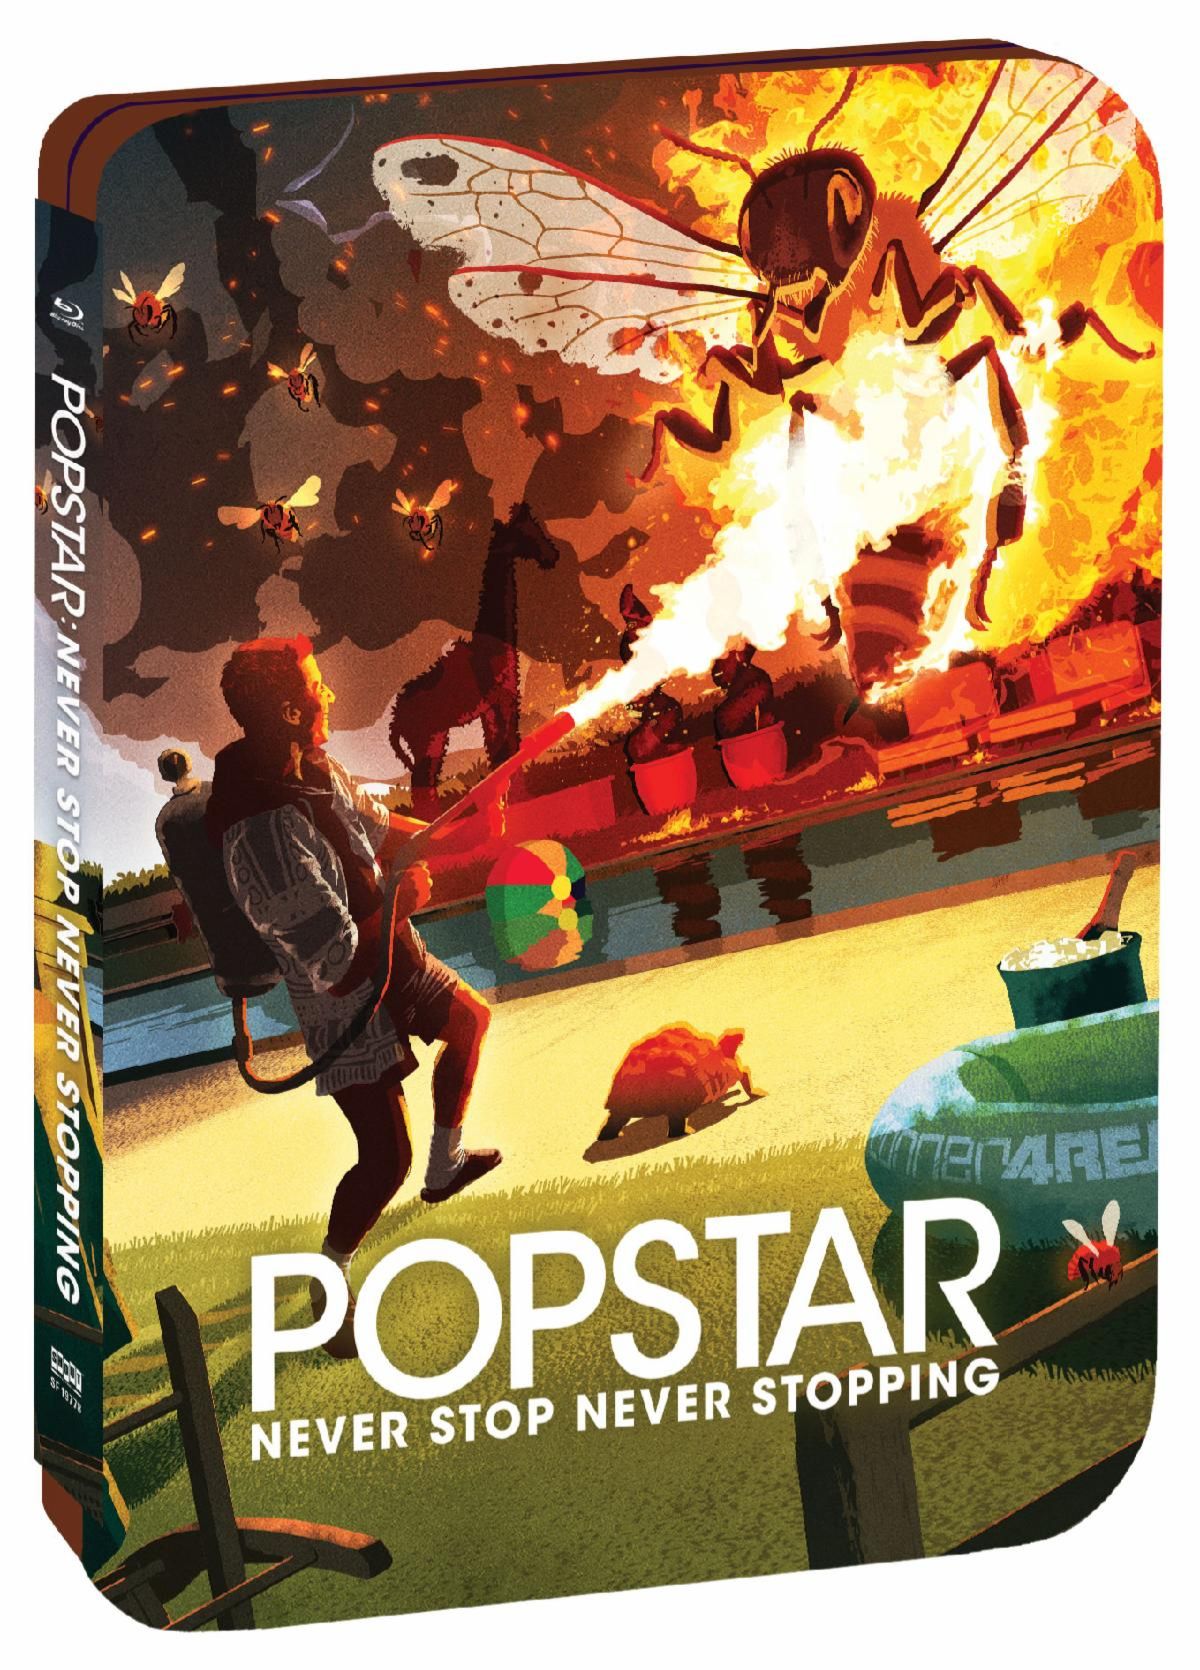 Popstar: Never Stop Never Stopping Steelbook Blu-ray